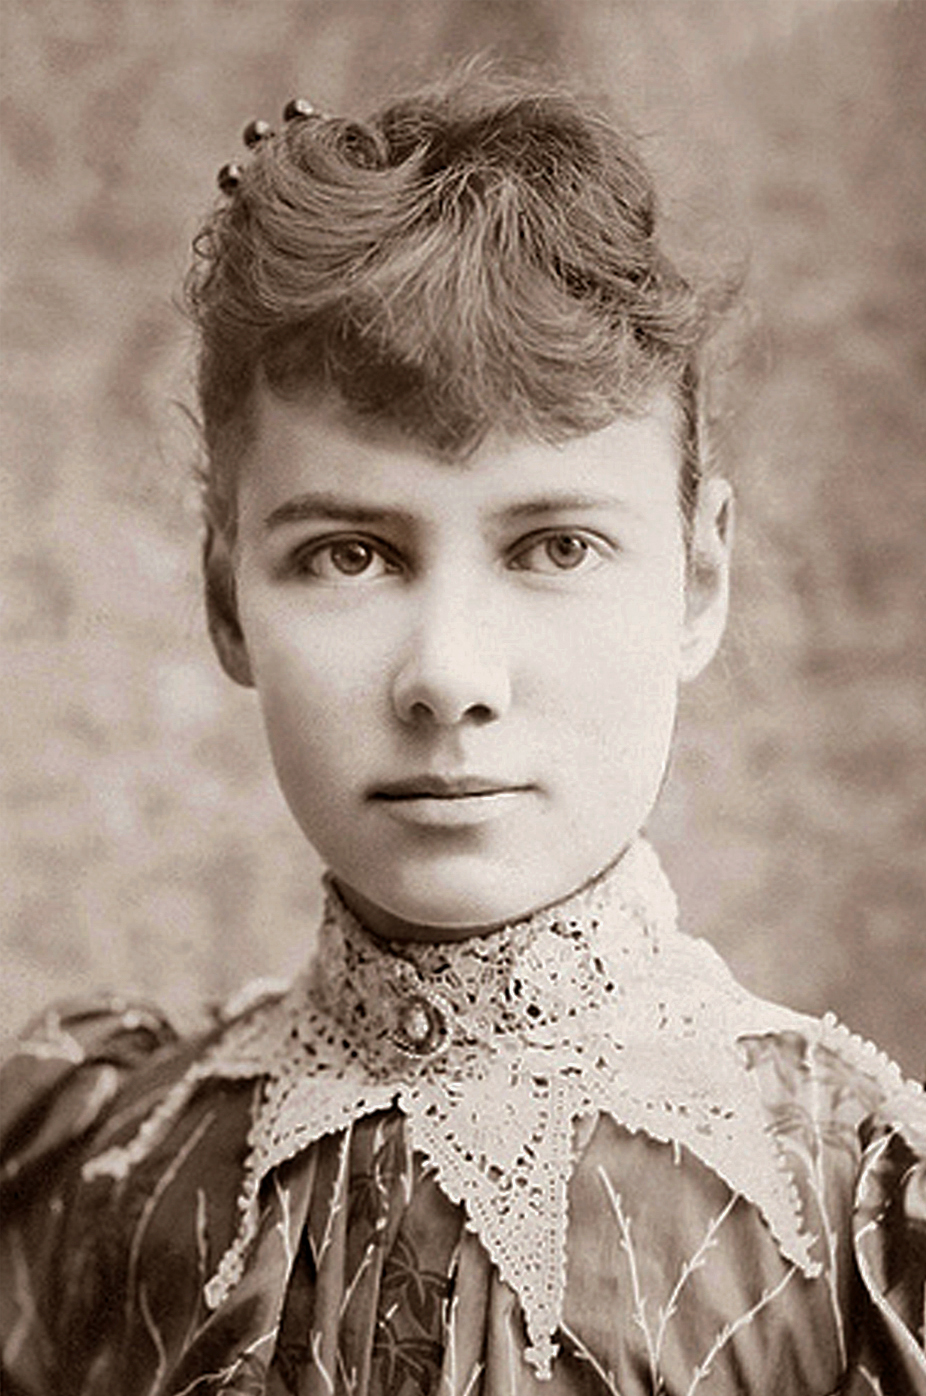 The Complete Works of Nellie Bly: Ten Days in a Mad-House, Around the World in Seventy-Two Days and More